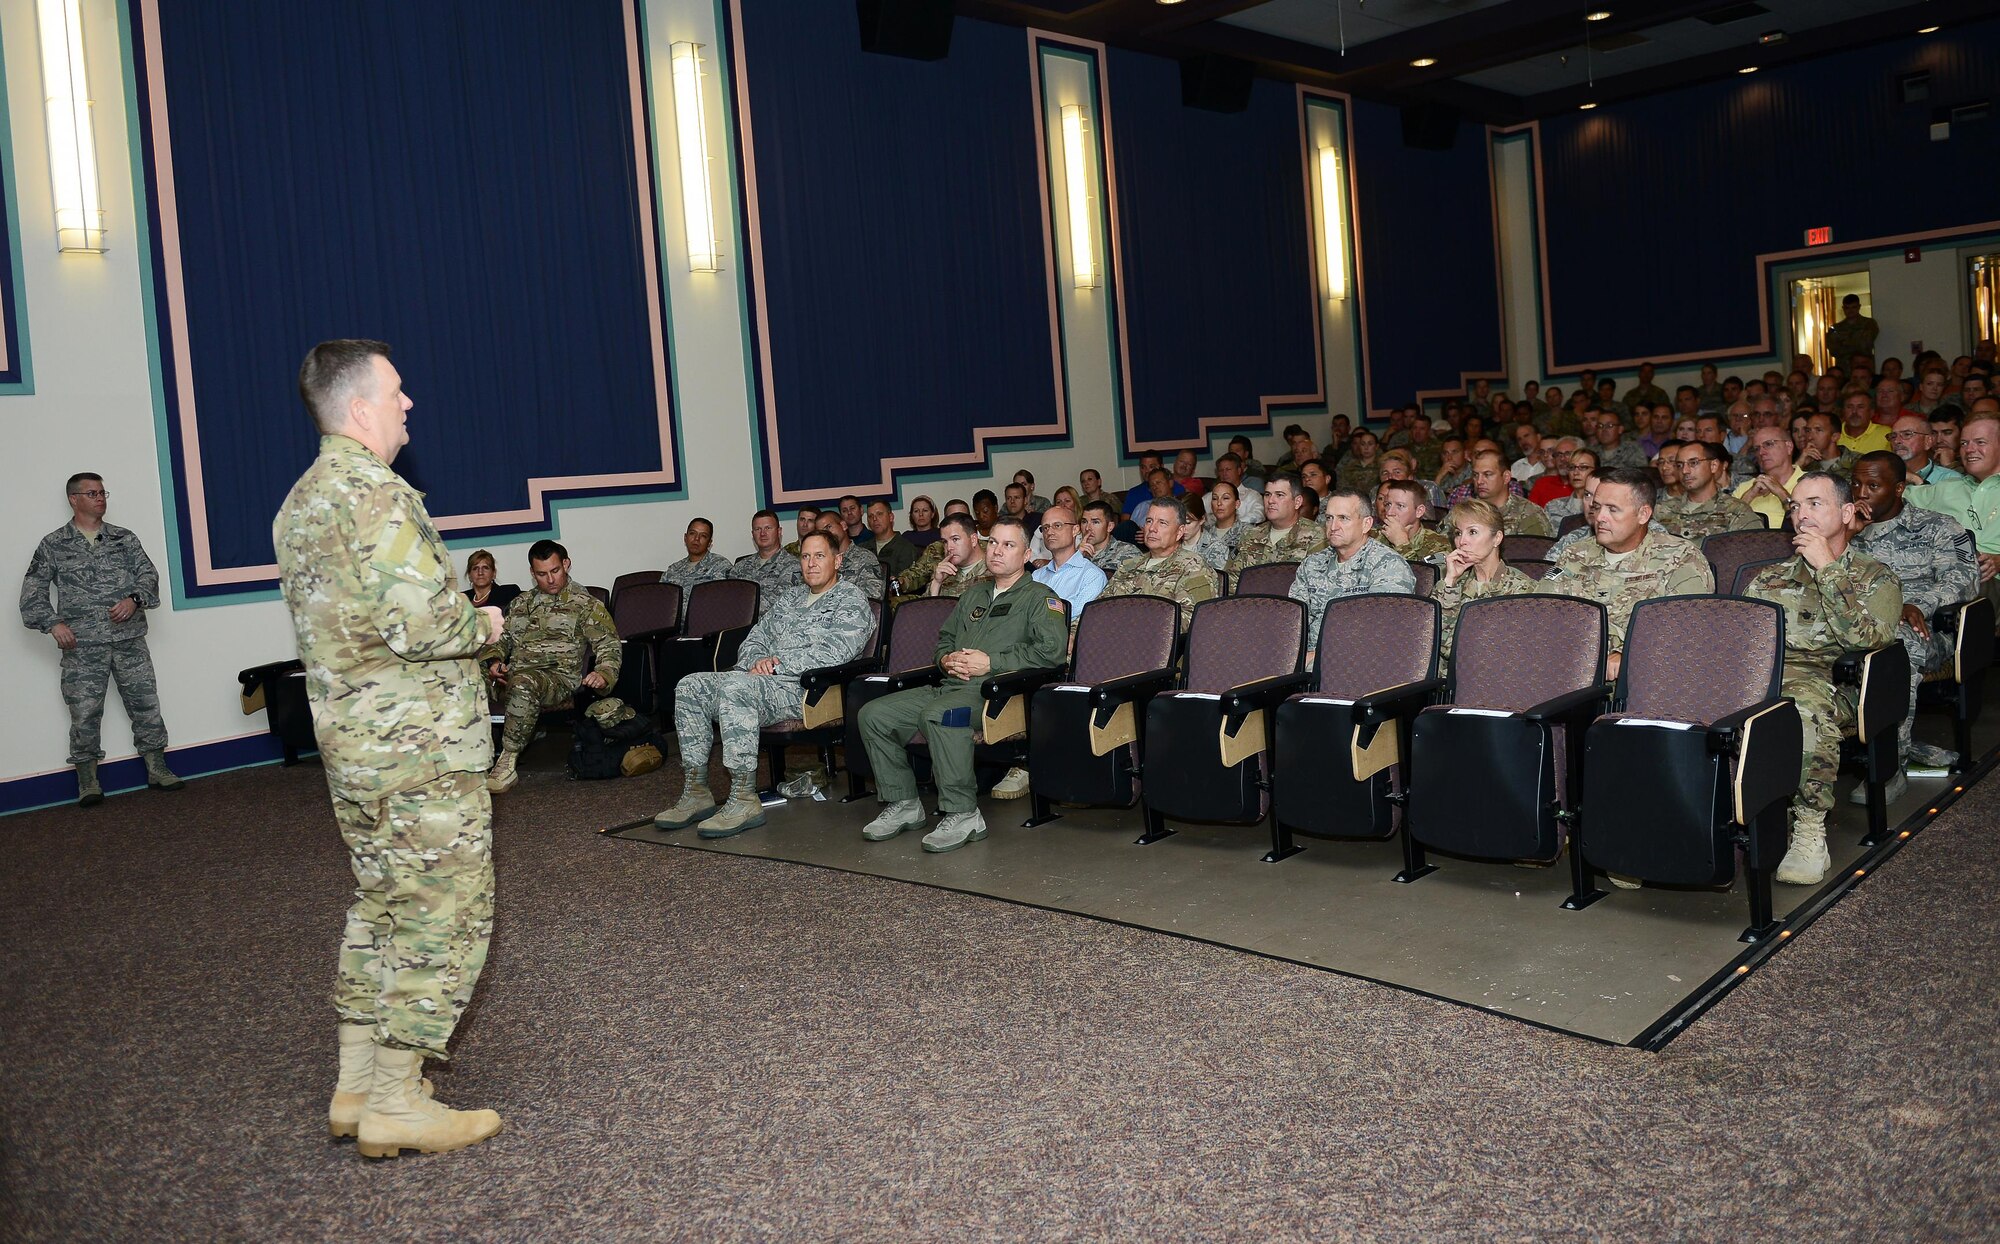 Lt. Gen. Brad Webb, commander of Air Force Special Operations Command, speaks to his staff at the King Auditorium on Hurlburt Field, Fla., Aug. 30, 2016. Webb shared his vision moving forward and priorities for the command. (U.S. Air Force photo/Staff Sgt. Melanie Holochwost)